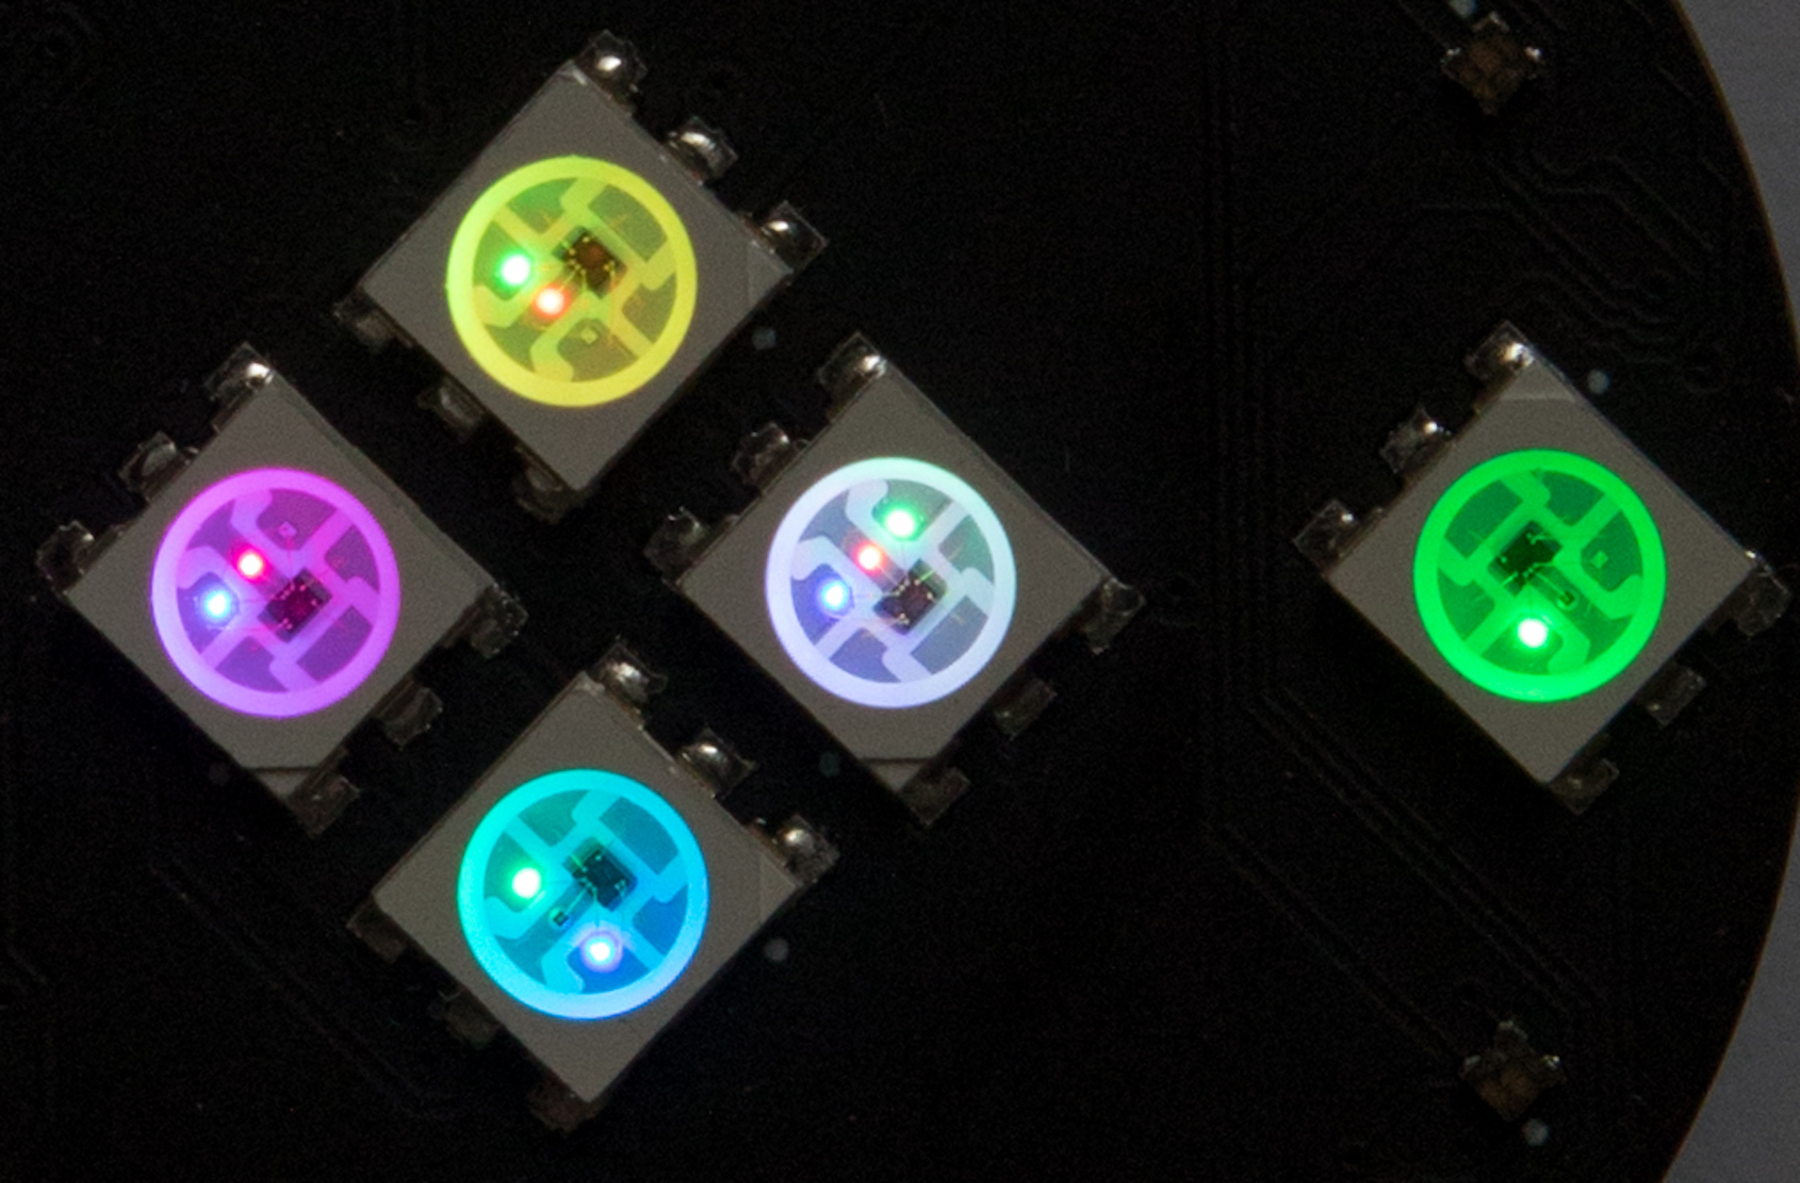 An up-close picture of some of the SpinWheel’s LEDs, showing the red, green, and blue subpixels.